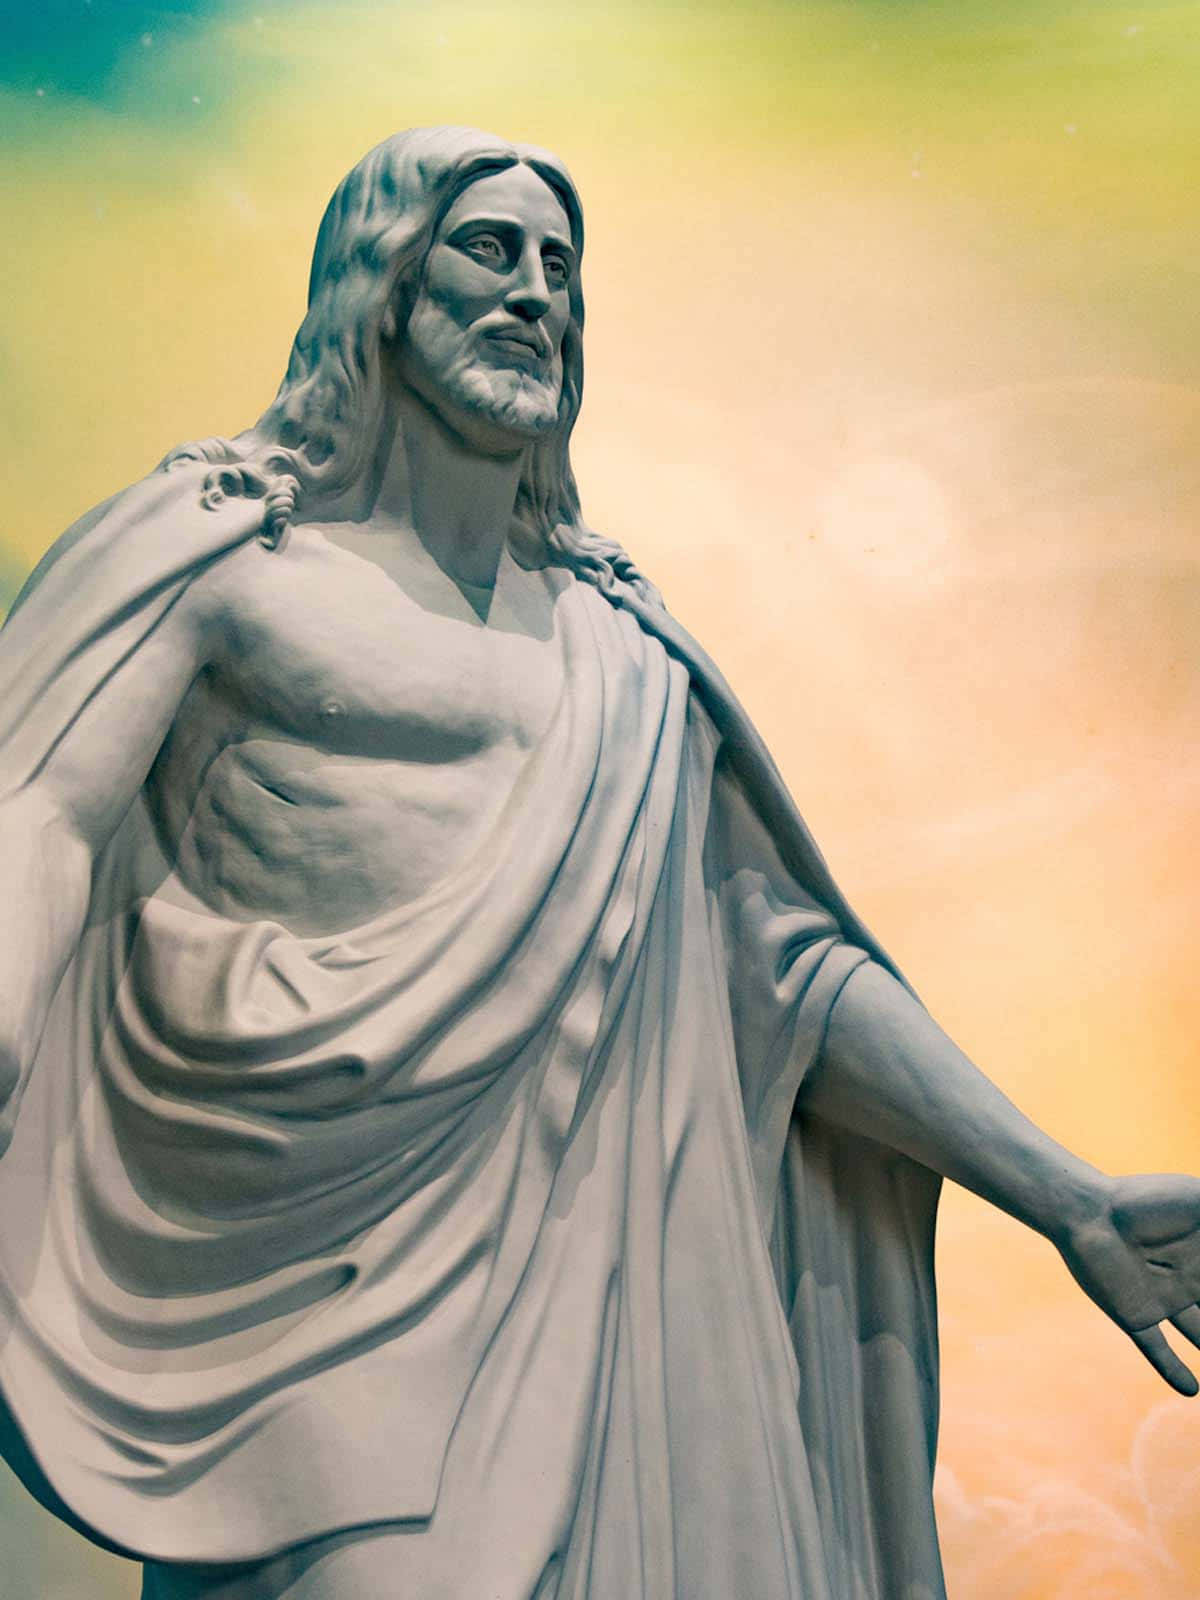 An inspiring image of Jesus for followers of the LDS Church. Wallpaper